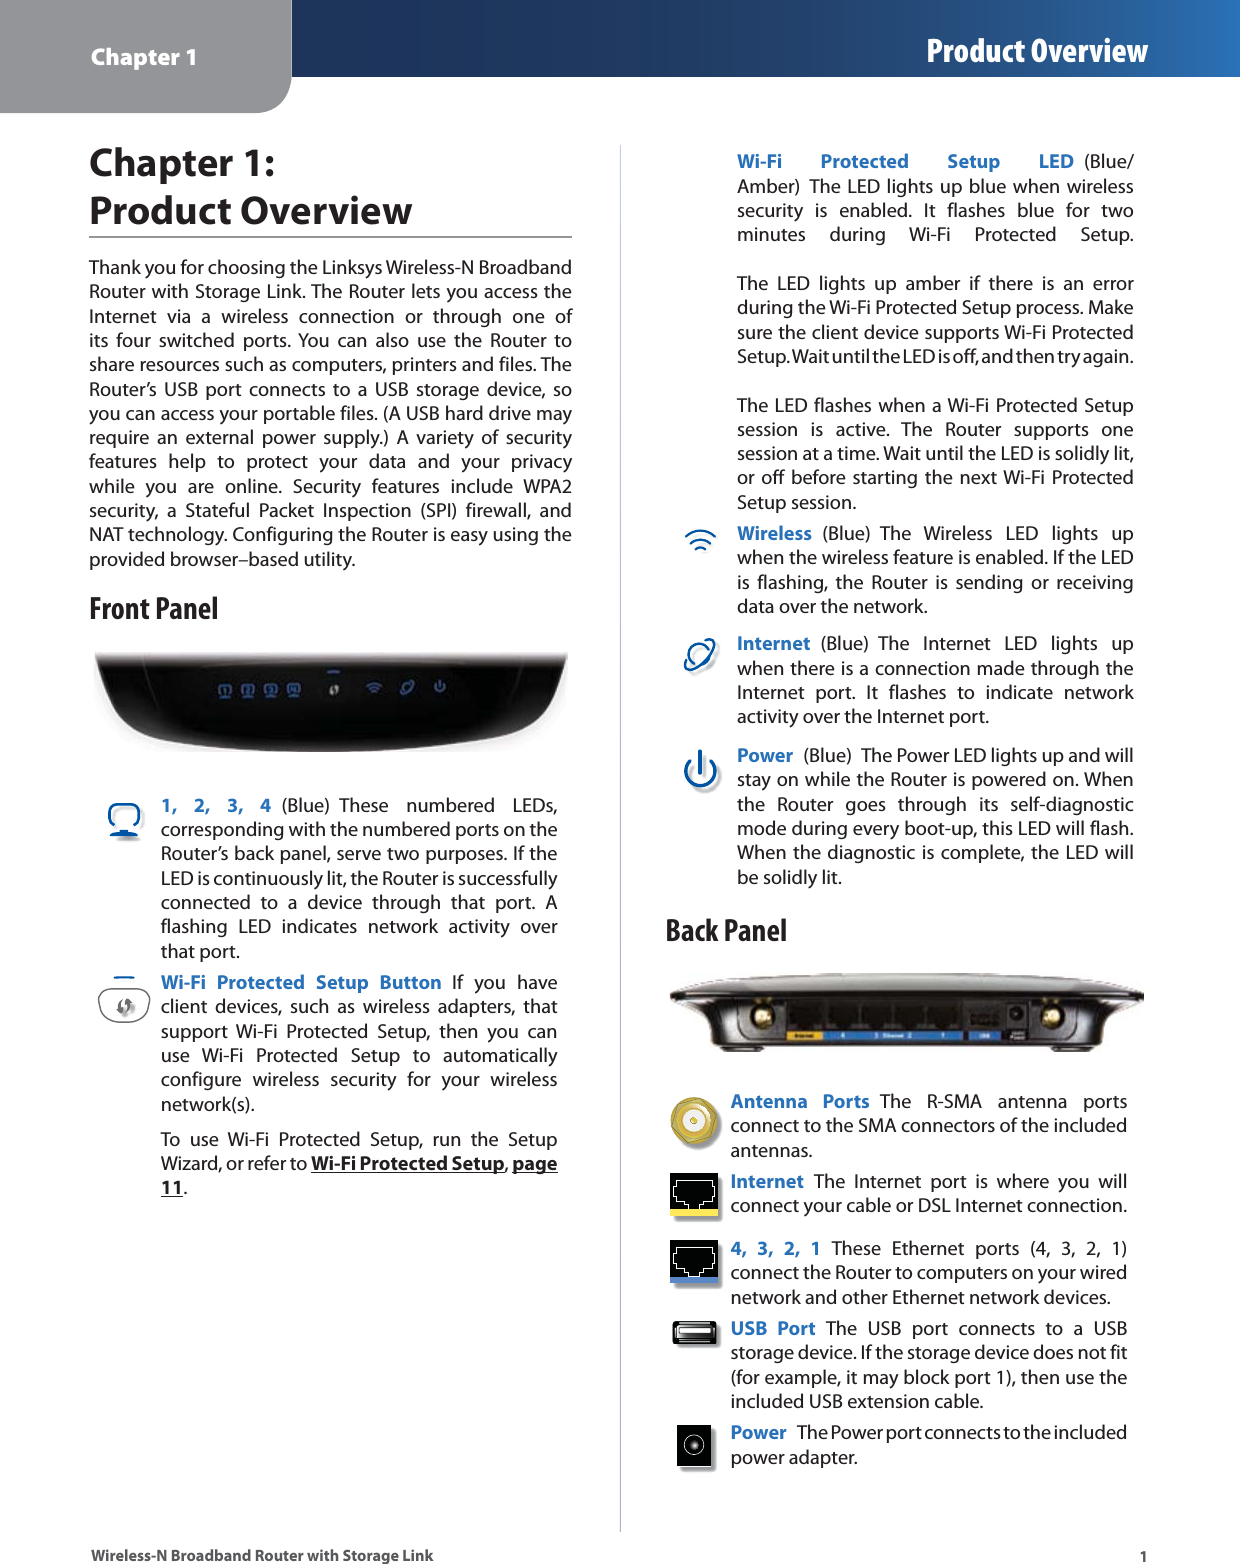 Chapter 1 Product Overview1Wireless-N Broadband Router with Storage LinkChapter 1: Product OverviewThank you for choosing the Linksys Wireless-N Broadband Router with Storage Link. The Router lets you access the Internet via a wireless connection or through one of its four switched ports. You can also use the Router to share resources such as computers, printers and files. The Router’s USB port connects to a USB storage device, so you can access your portable files. (A USB hard drive may require an external power supply.) A variety of security features help to protect your data and your privacy while you are online. Security features include WPA2 security, a Stateful Packet Inspection (SPI) firewall, and NAT technology. Configuring the Router is easy using the provided browser–based utility.Front Panel1, 2, 3, 4 (Blue) These numbered LEDs, corresponding with the numbered ports on the Router’s back panel, serve two purposes. If the LED is continuously lit, the Router is successfully connected to a device through that port. A flashing LED indicates network activity over that port. Wi-Fi Protected Setup Button If you have client devices, such as wireless adapters, that support Wi-Fi Protected Setup, then you can use Wi-Fi Protected Setup to automatically configure wireless security for your wireless network(s).To use Wi-Fi Protected Setup, run the Setup Wizard, or refer to Wi-Fi Protected Setup, page 11.Wi-Fi Protected Setup LED (Blue/Amber)  The LED lights up blue when wireless security is enabled. It flashes blue for two minutes during Wi-Fi Protected Setup.    The LED lights up amber if there is an error during the Wi-Fi Protected Setup process. Make sure the client device supports Wi-Fi Protected Setup. Wait until the LED is off, and then try again.   The LED flashes when a Wi-Fi Protected Setup session is active. The Router supports one session at a time. Wait until the LED is solidly lit, or off before starting the next Wi-Fi Protected Setup session.Wireless (Blue) The Wireless LED lights up when the wireless feature is enabled. If the LED is flashing, the Router is sending or receiving data over the network.Internet  (Blue) The Internet LED lights up when there is a connection made through the Internet port. It flashes to indicate network activity over the Internet port. Power  (Blue)  The Power LED lights up and will stay on while the Router is powered on. When the Router goes through its self-diagnostic mode during every boot-up, this LED will flash. When the diagnostic is complete, the LED will be solidly lit.Back PanelAntenna Ports The R-SMA antenna ports connect to the SMA connectors of the included antennas.Internet  The Internet port is where you will connect your cable or DSL Internet connection. 4, 3, 2, 1 These Ethernet ports (4, 3, 2, 1) connect the Router to computers on your wired network and other Ethernet network devices. USB Port The USB port connects to a USB storage device. If the storage device does not fit (for example, it may block port 1), then use the included USB extension cable.Power  The Power port connects to the included power adapter.